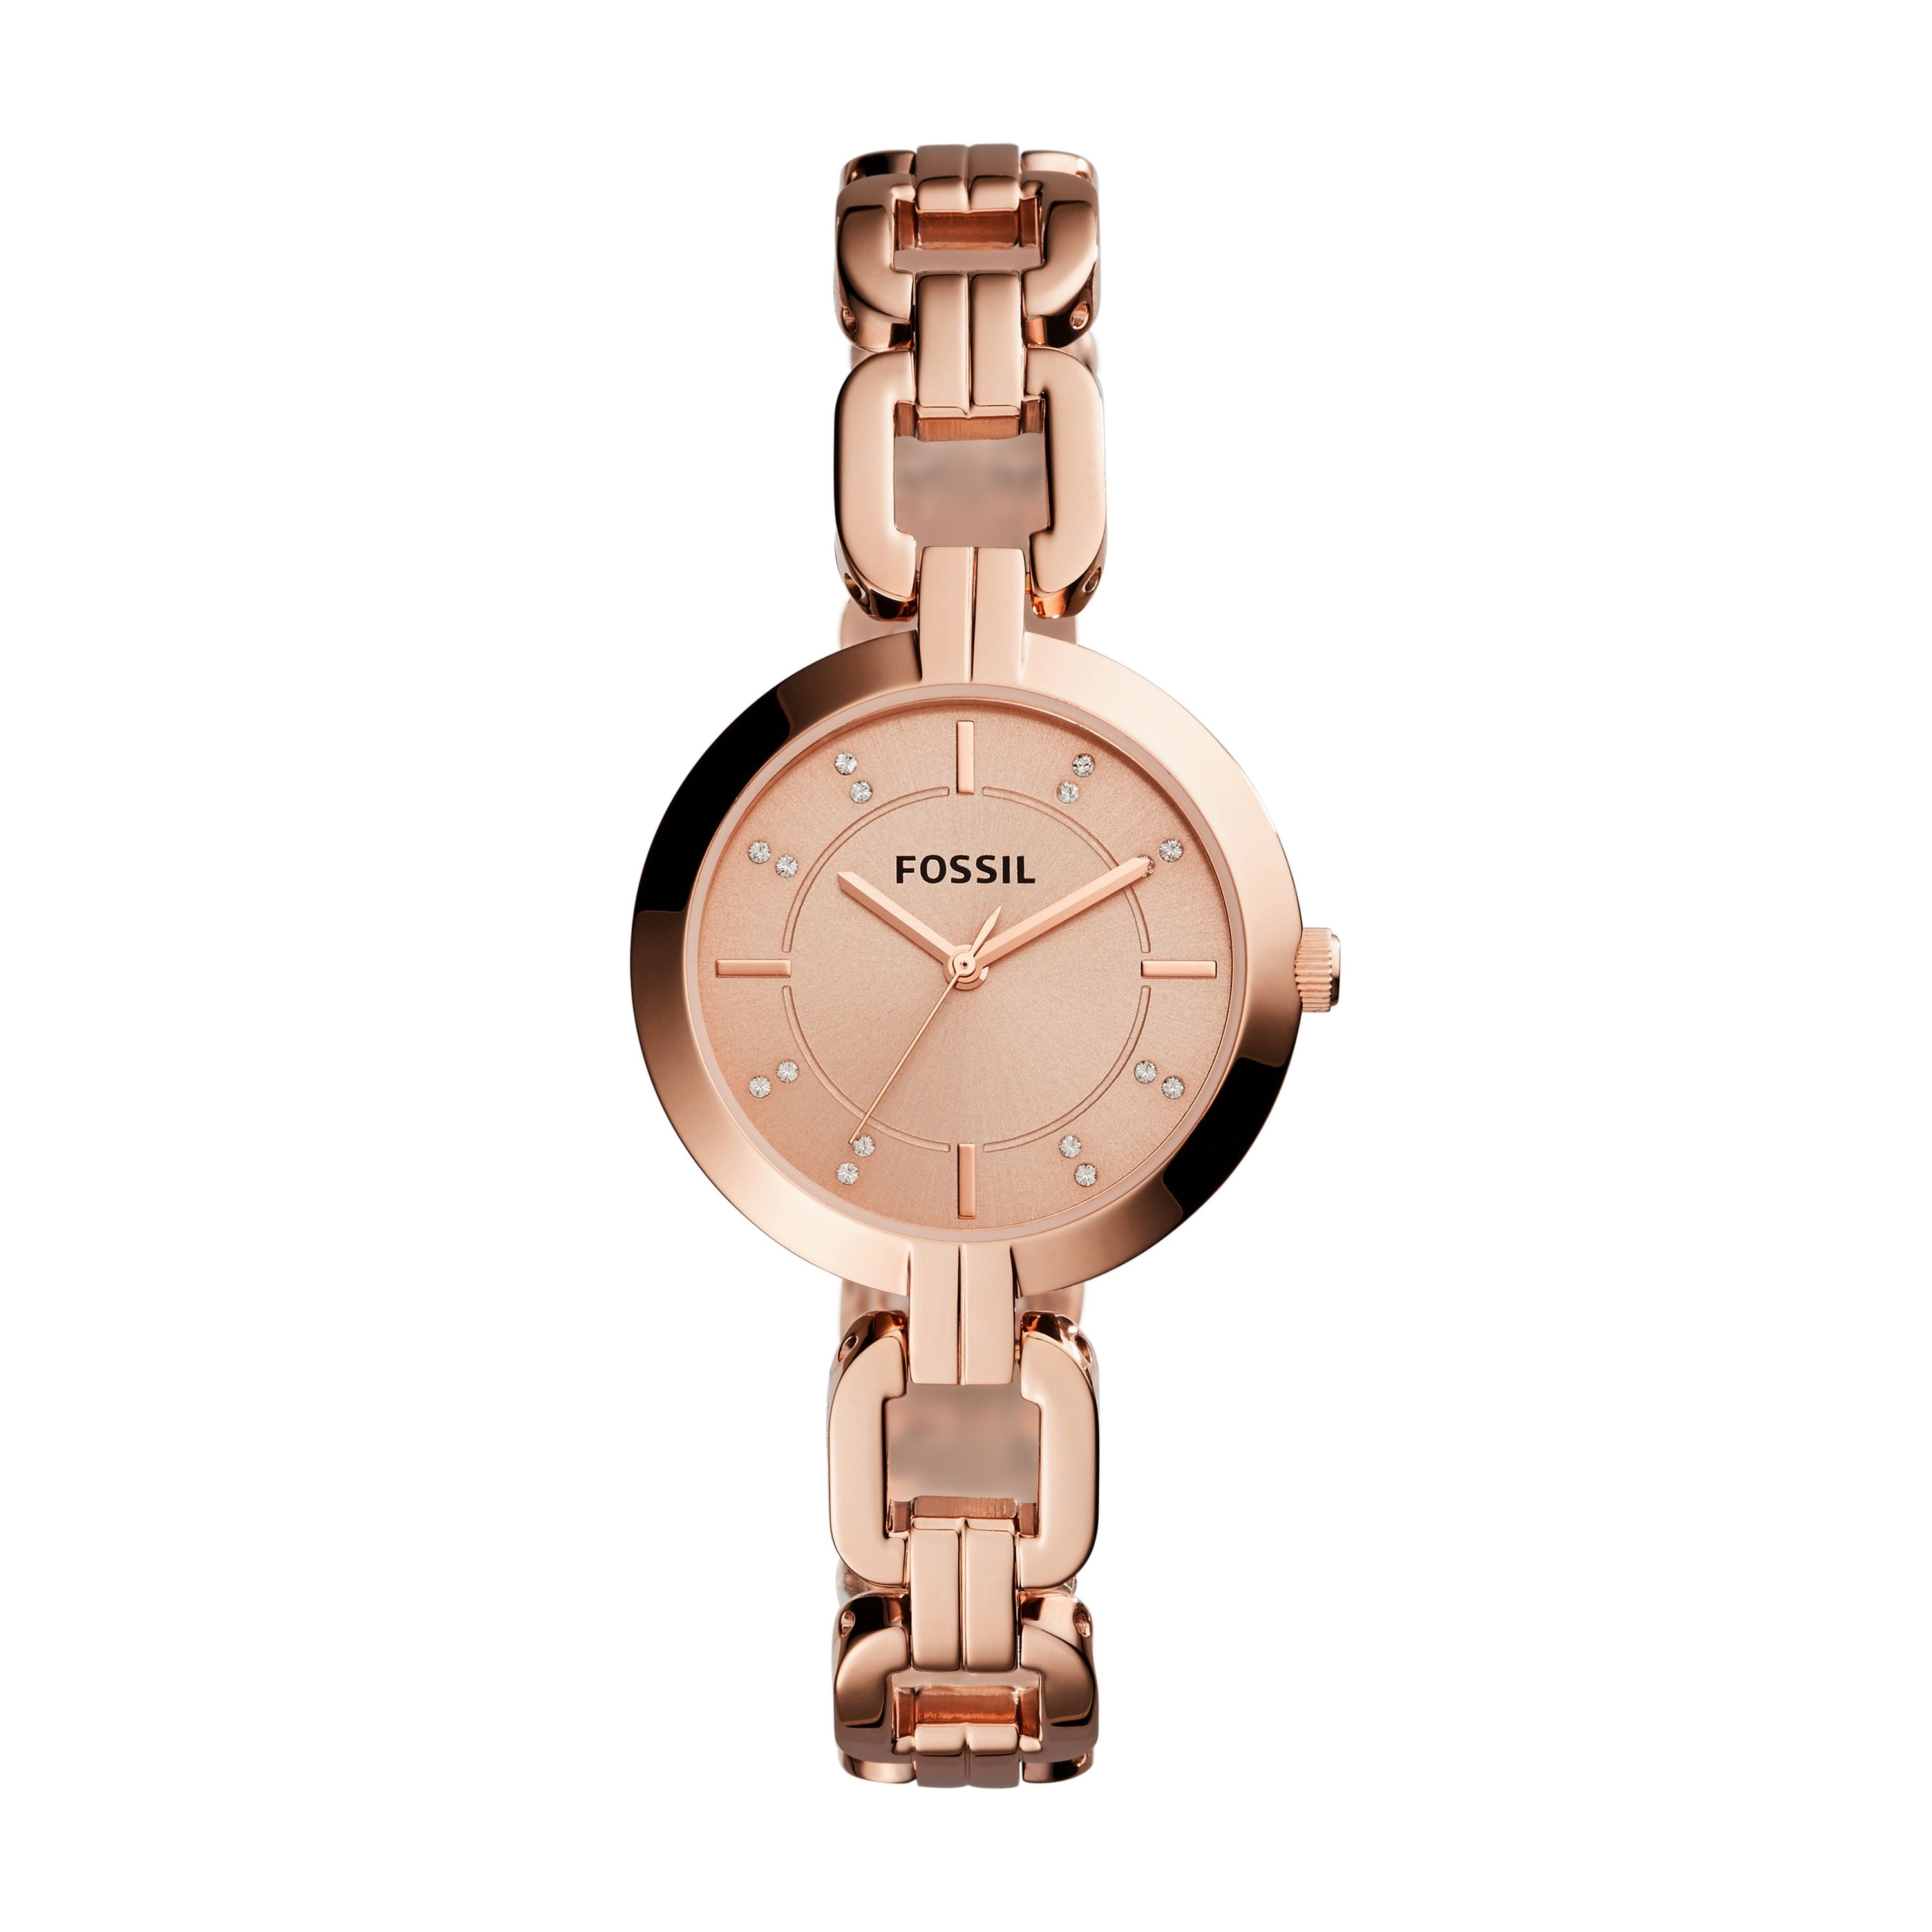 Fossil Women's Kerrigan Three-Hand Rose Gold-Tone Stainless Steel Watch ...